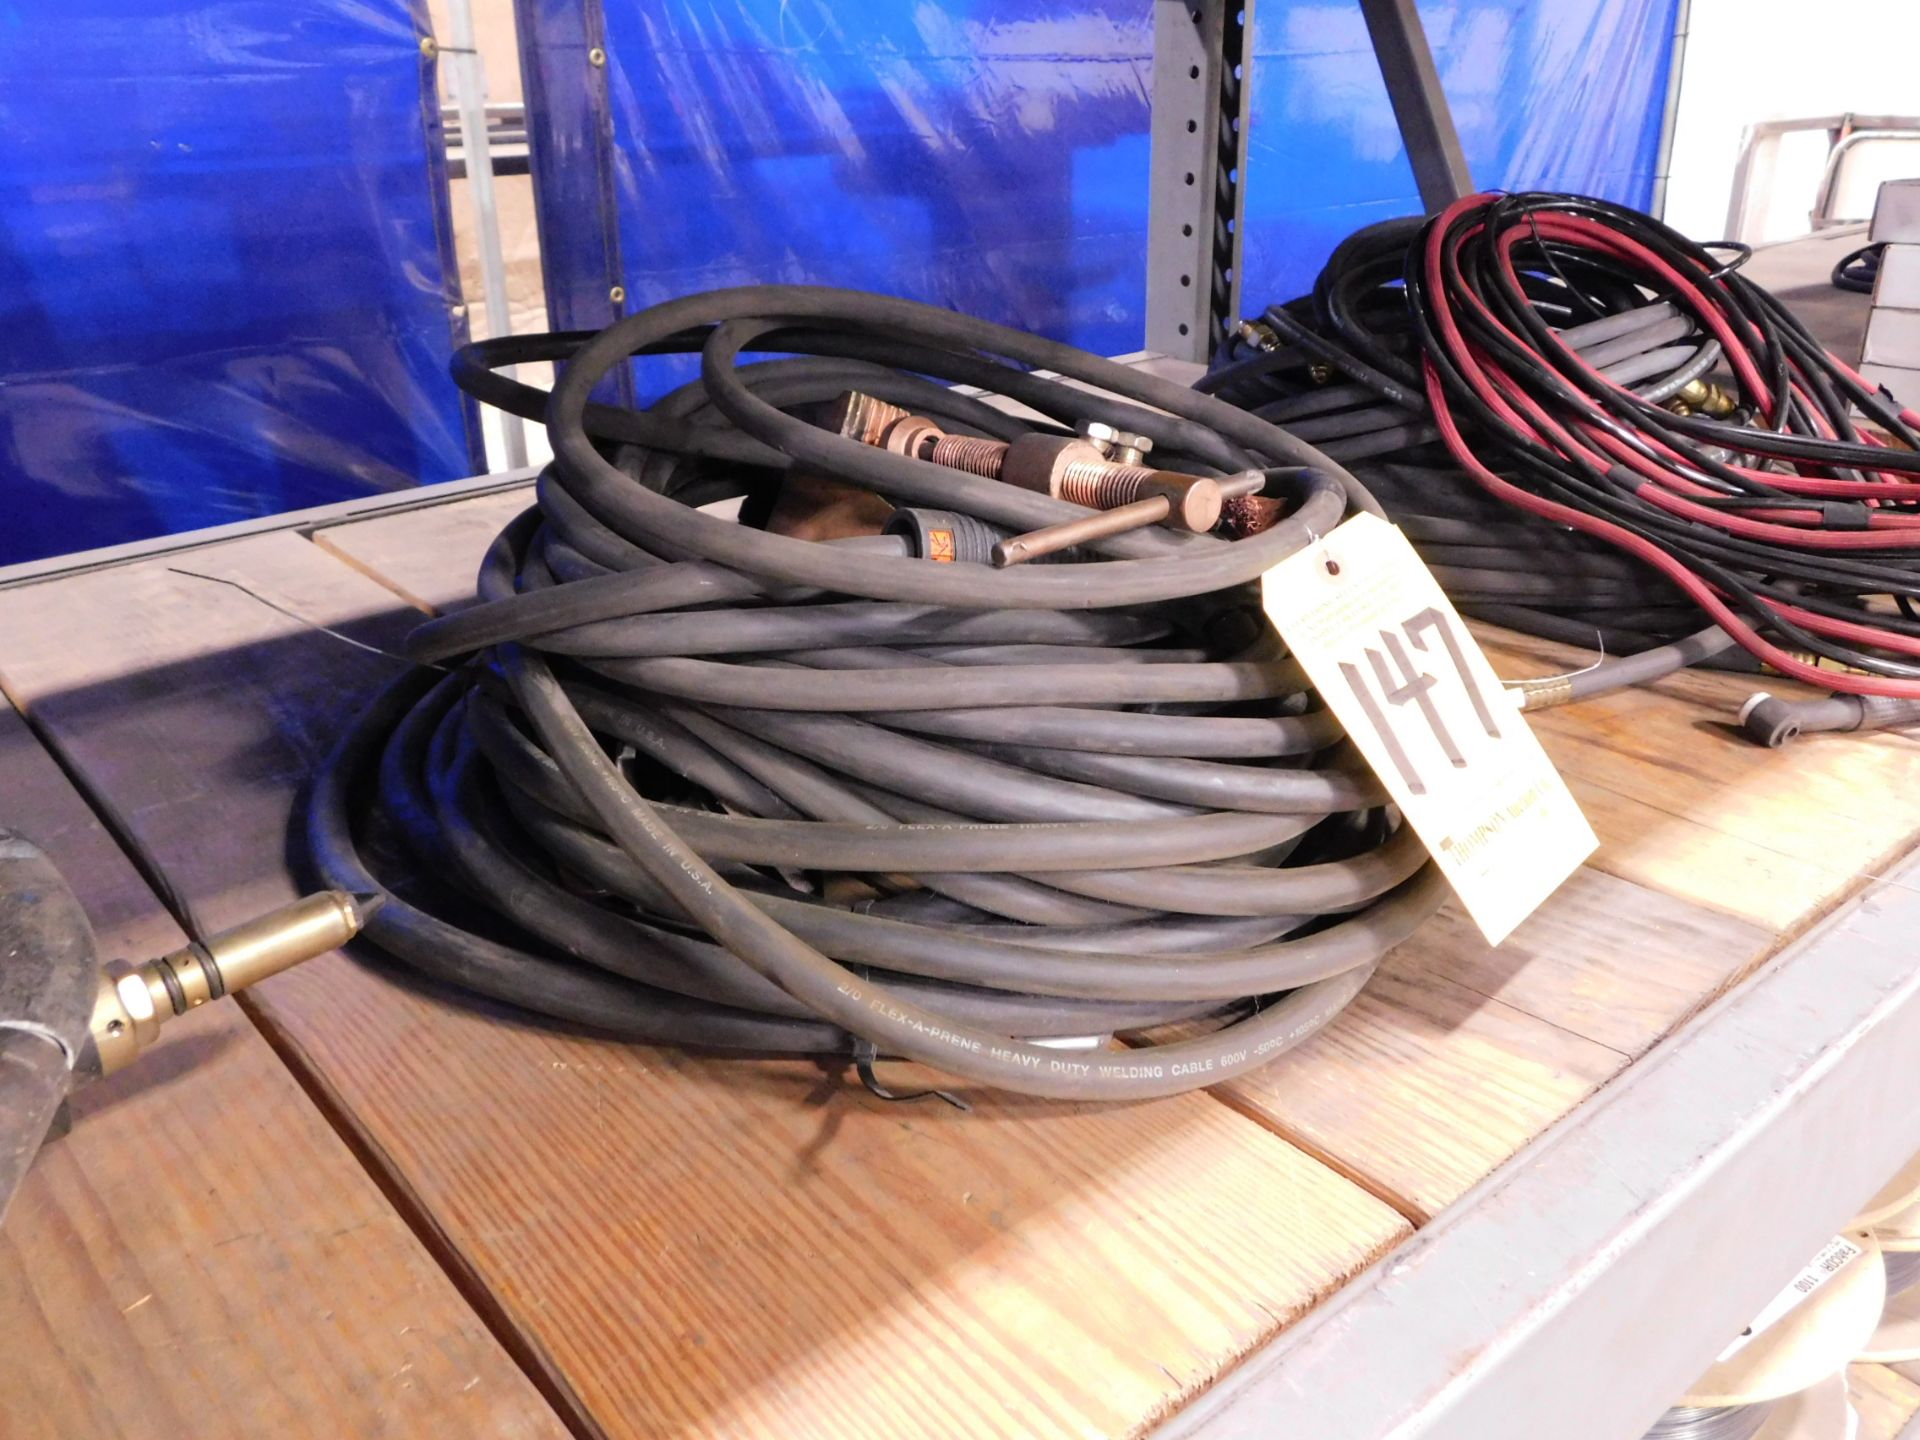 Welding Lead and Ground Cables